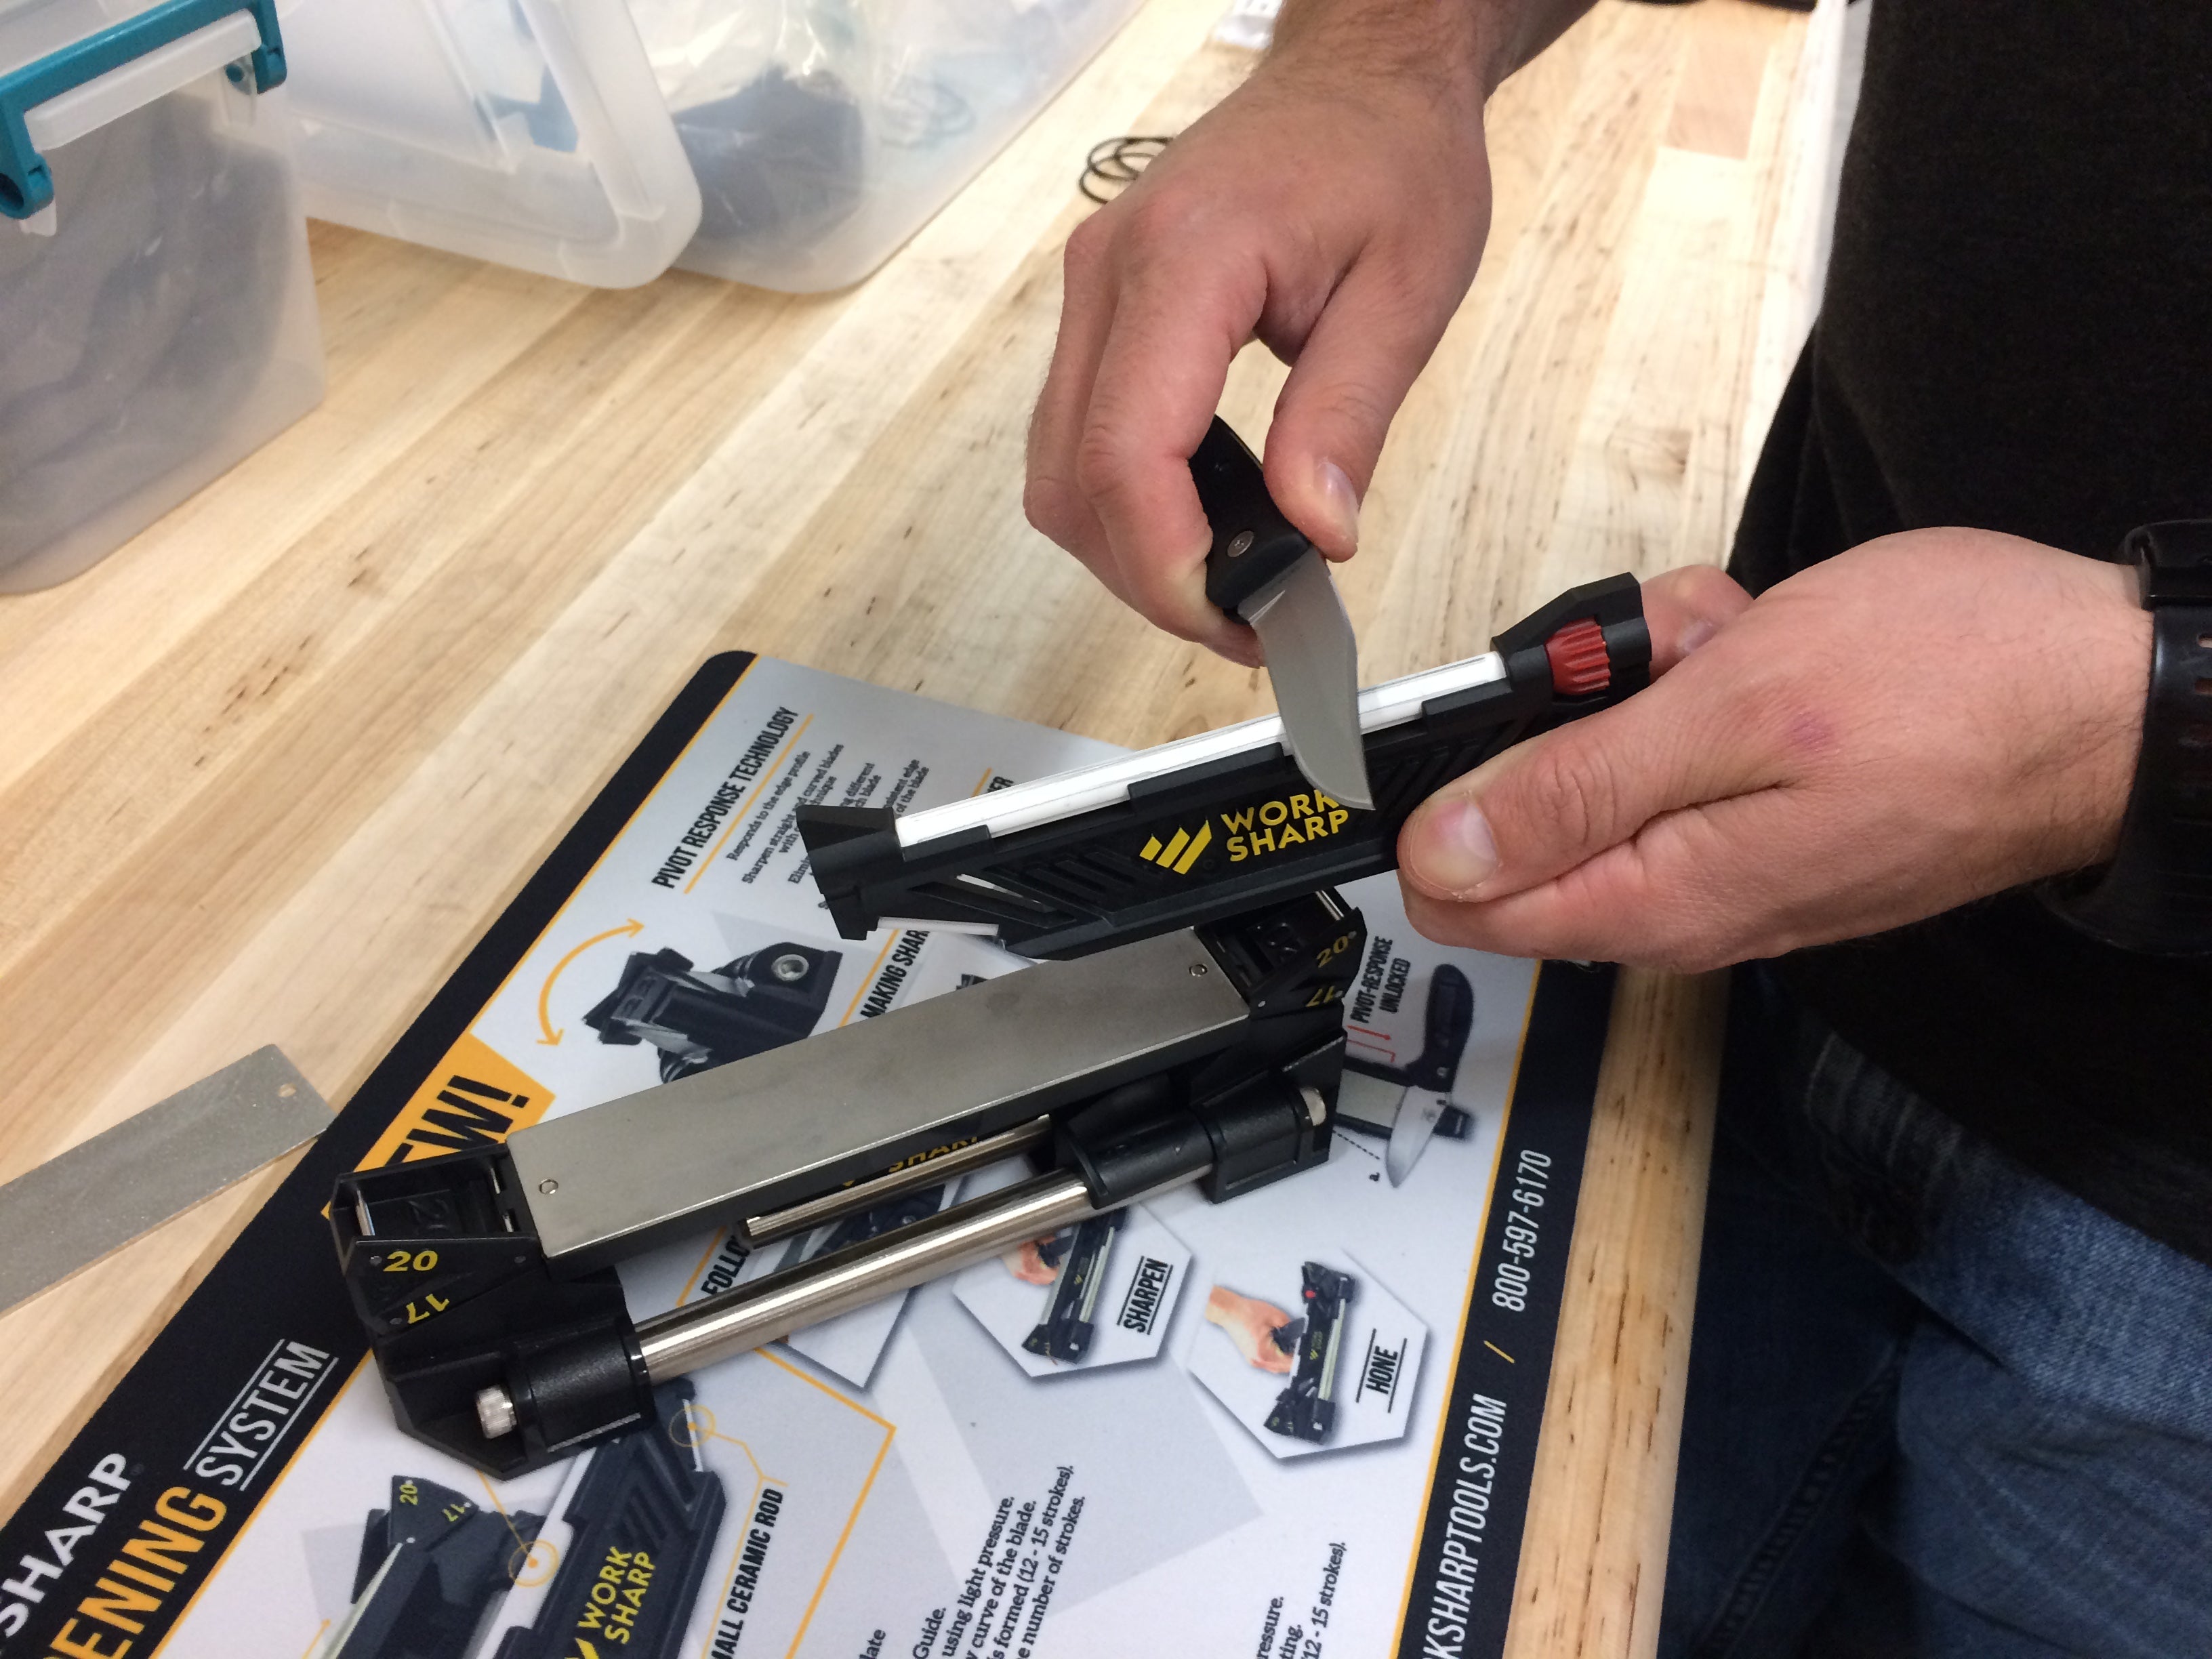 Tool Review: Sharpening Systems